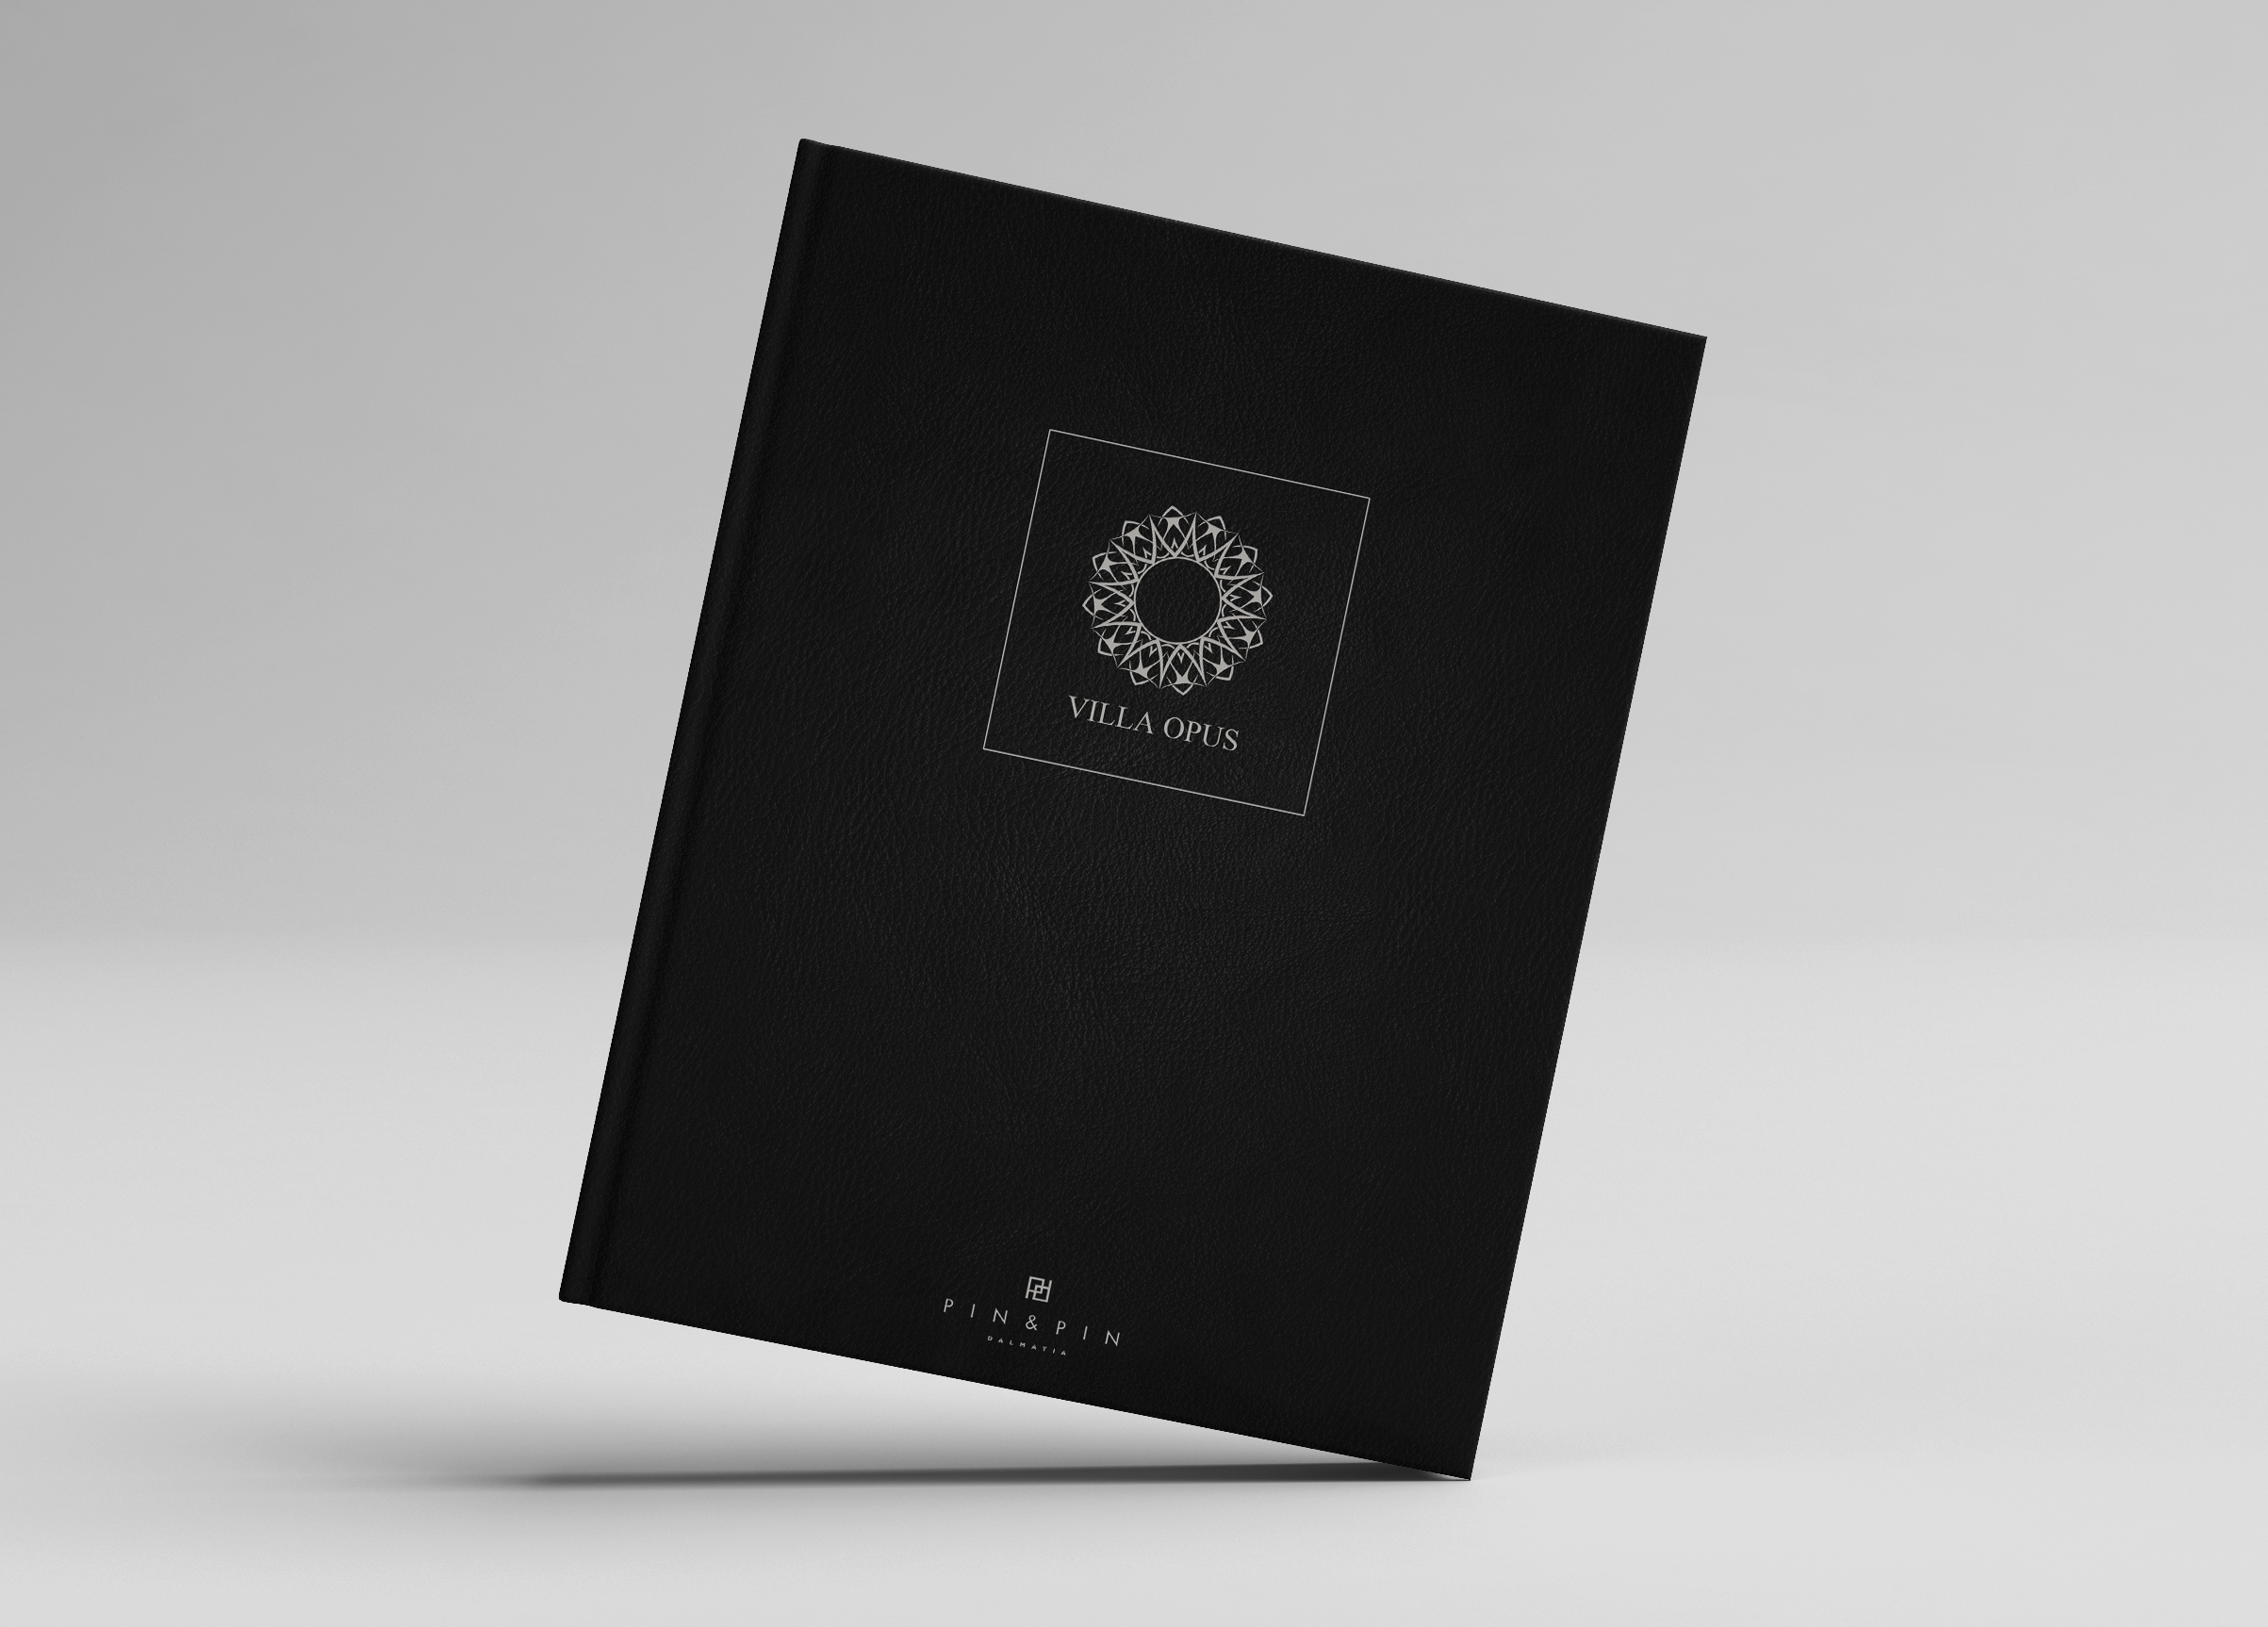 The black book cover with golden letters, standing on the white background.